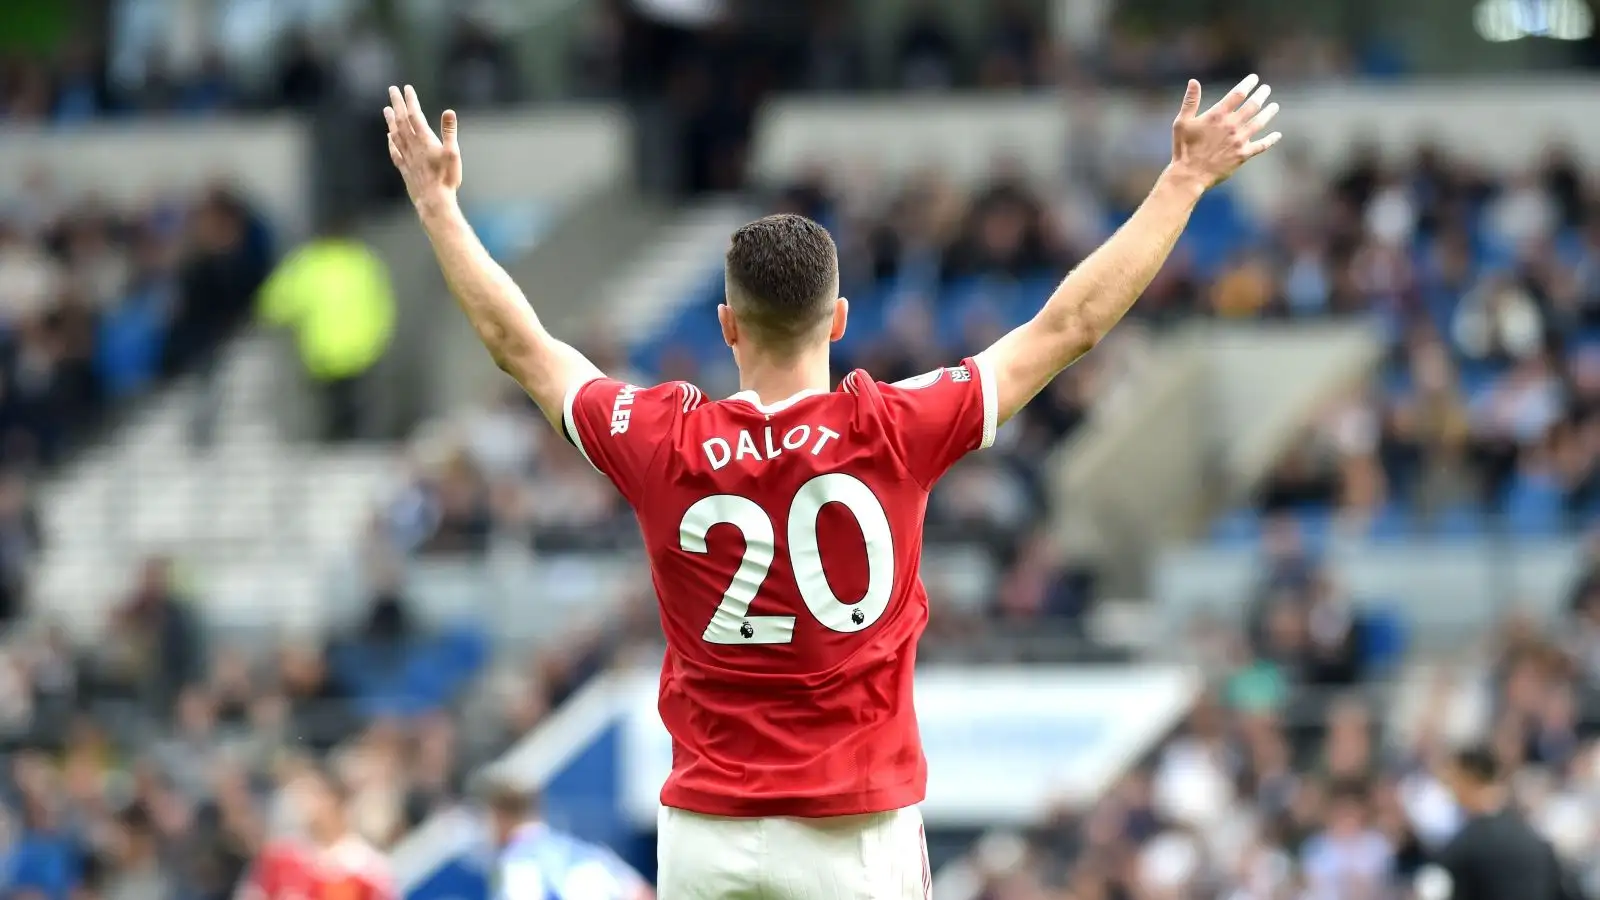 Man Utd defender Diogo Dalot throws his hands up in the air